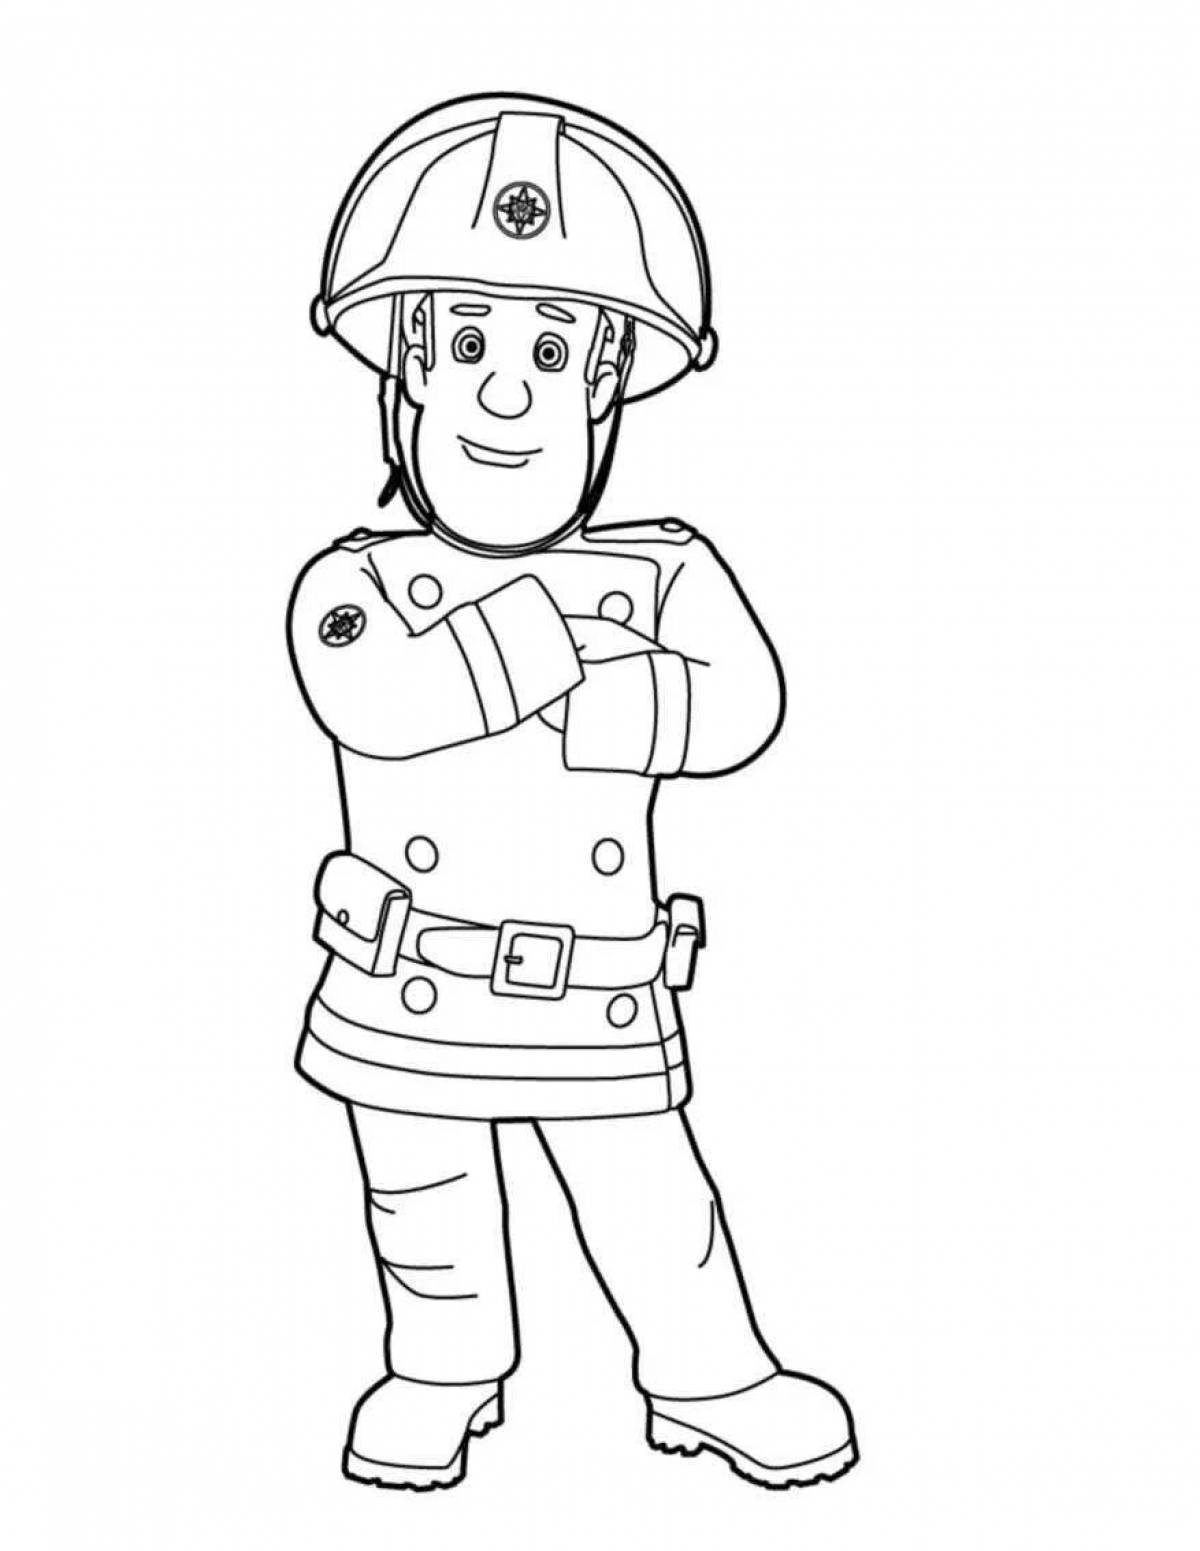 Great drawing of a fireman for kids